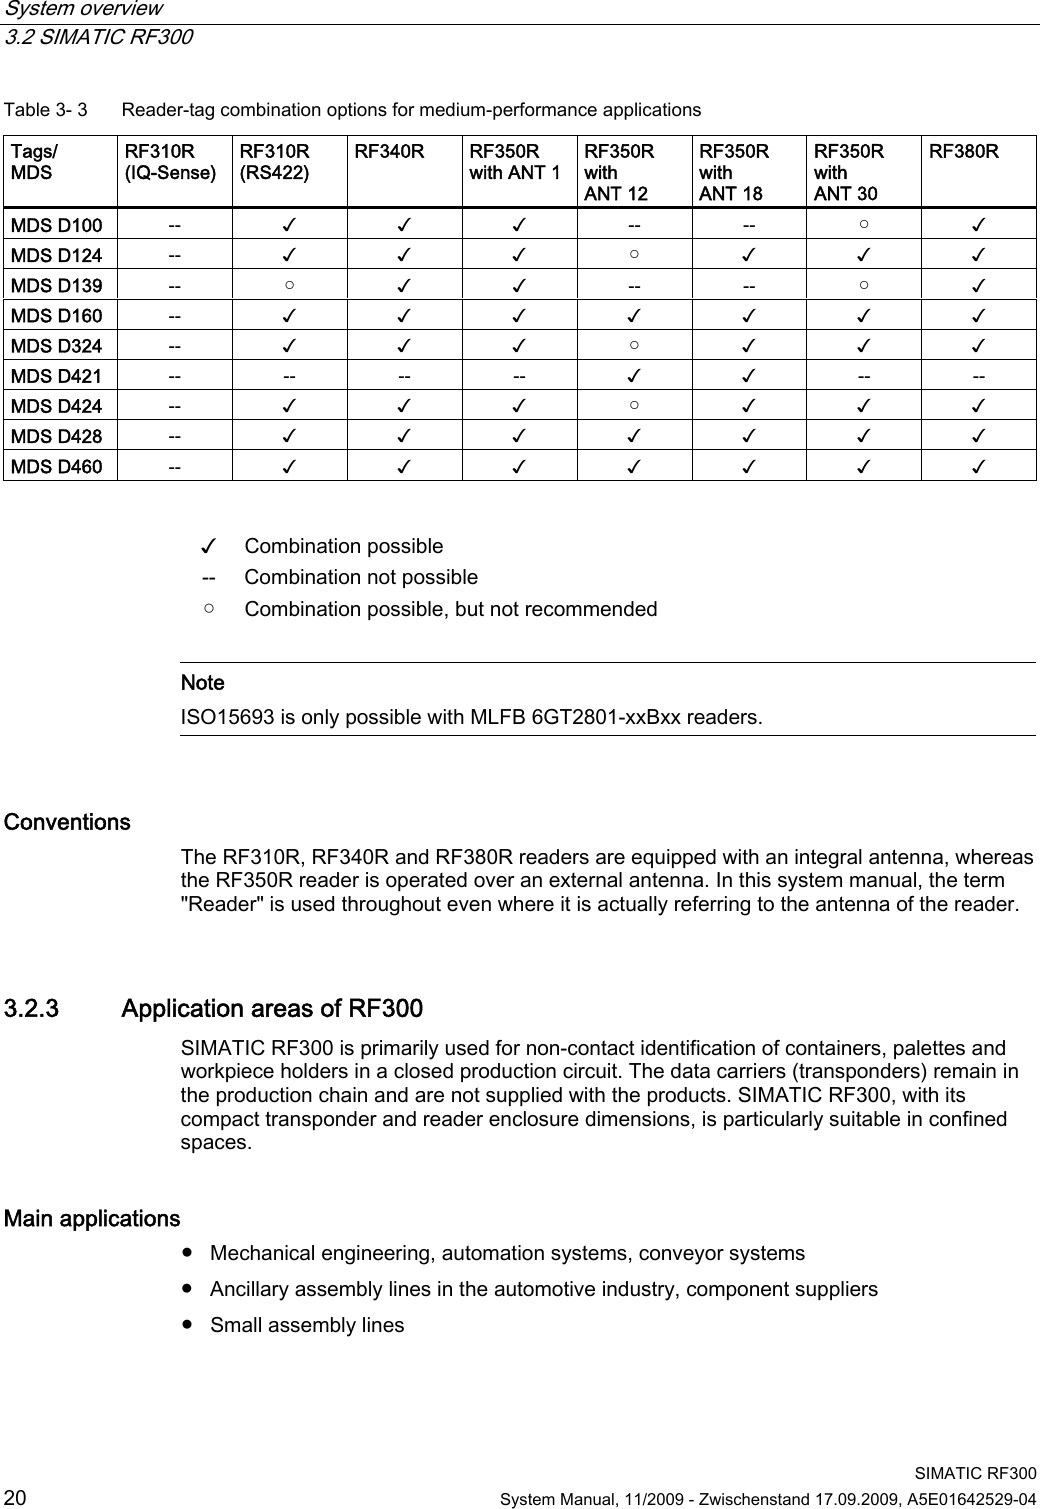 System overview   3.2 SIMATIC RF300  SIMATIC RF300 20  System Manual, 11/2009 - Zwischenstand 17.09.2009, A5E01642529-04 Table 3- 3  Reader-tag combination options for medium-performance applications Tags/ MDS RF310R  (IQ-Sense) RF310R (RS422) RF340R  RF350R with ANT 1 RF350R with ANT 12 RF350R with ANT 18 RF350R with ANT 30 RF380R MDS D100  --  ✓  ✓  ✓  --  --  ○  ✓ MDS D124  --  ✓  ✓  ✓  ○  ✓  ✓  ✓ MDS D139  --  ○  ✓  ✓  --  --  ○  ✓ MDS D160  --  ✓  ✓  ✓  ✓  ✓  ✓  ✓ MDS D324  --  ✓  ✓  ✓  ○  ✓  ✓  ✓ MDS D421  --  --  --  --  ✓  ✓  --  -- MDS D424  --  ✓  ✓  ✓  ○  ✓  ✓  ✓ MDS D428  --  ✓  ✓  ✓  ✓  ✓  ✓  ✓ MDS D460  --  ✓  ✓  ✓  ✓  ✓  ✓  ✓   ✓  Combination possible --  Combination not possible ○  Combination possible, but not recommended    Note ISO15693 is only possible with MLFB 6GT2801-xxBxx readers.  Conventions  The RF310R, RF340R and RF380R readers are equipped with an integral antenna, whereas the RF350R reader is operated over an external antenna. In this system manual, the term &quot;Reader&quot; is used throughout even where it is actually referring to the antenna of the reader. 3.2.3 Application areas of RF300 SIMATIC RF300 is primarily used for non-contact identification of containers, palettes and workpiece holders in a closed production circuit. The data carriers (transponders) remain in the production chain and are not supplied with the products. SIMATIC RF300, with its compact transponder and reader enclosure dimensions, is particularly suitable in confined spaces.  Main applications  ● Mechanical engineering, automation systems, conveyor systems ● Ancillary assembly lines in the automotive industry, component suppliers ● Small assembly lines 